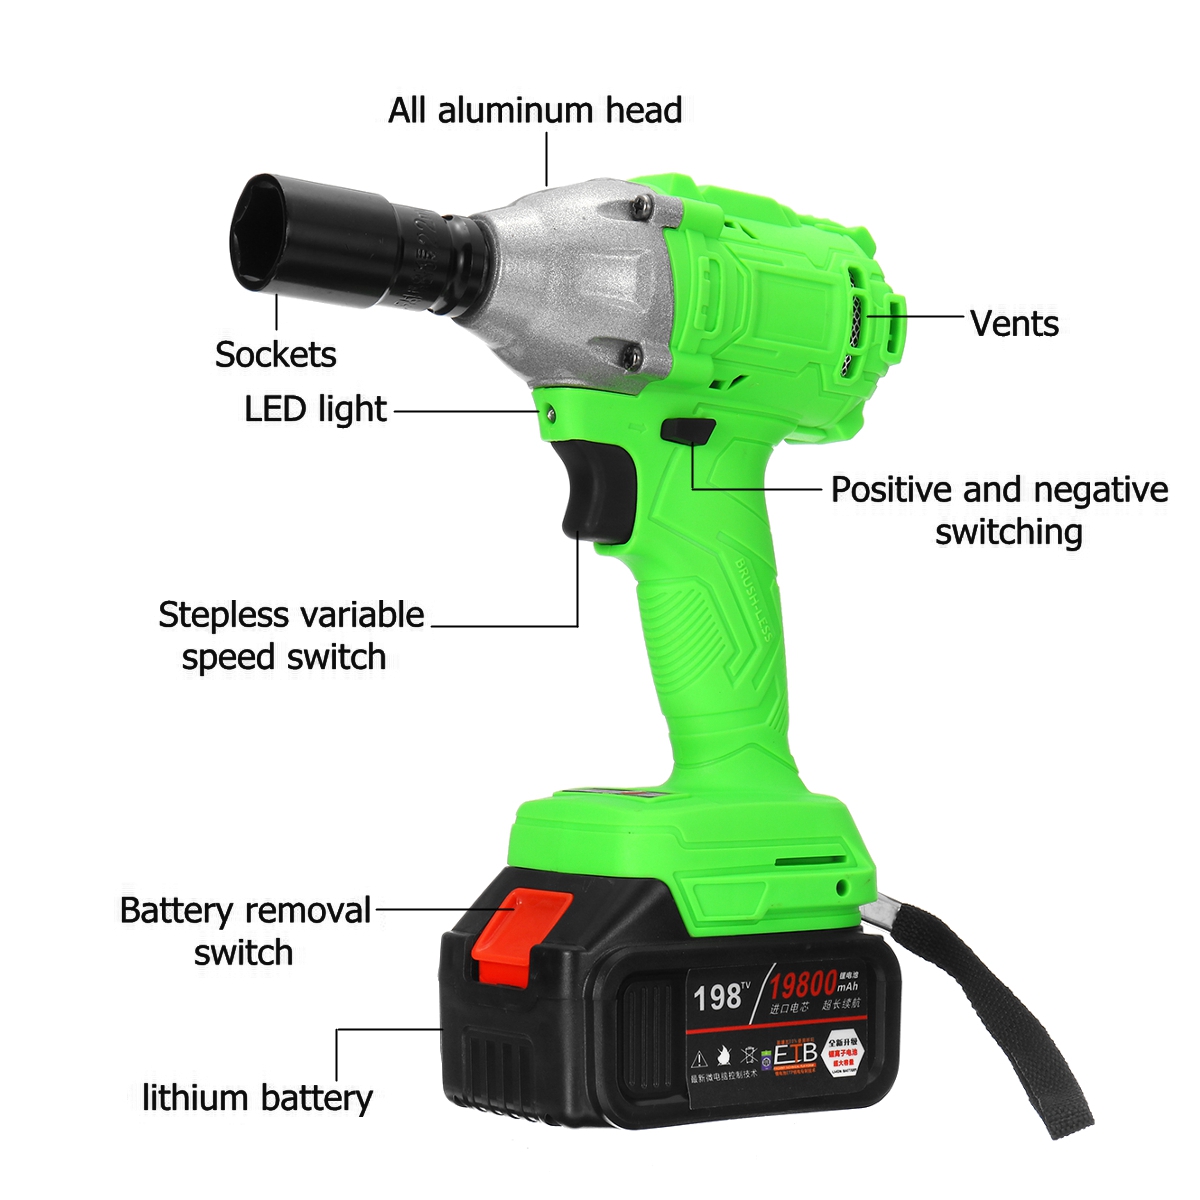 12-520Nm-19800mAh-Electric-Cordless-Impact-Wrench-Brushless-Battery--Case-1676852-4